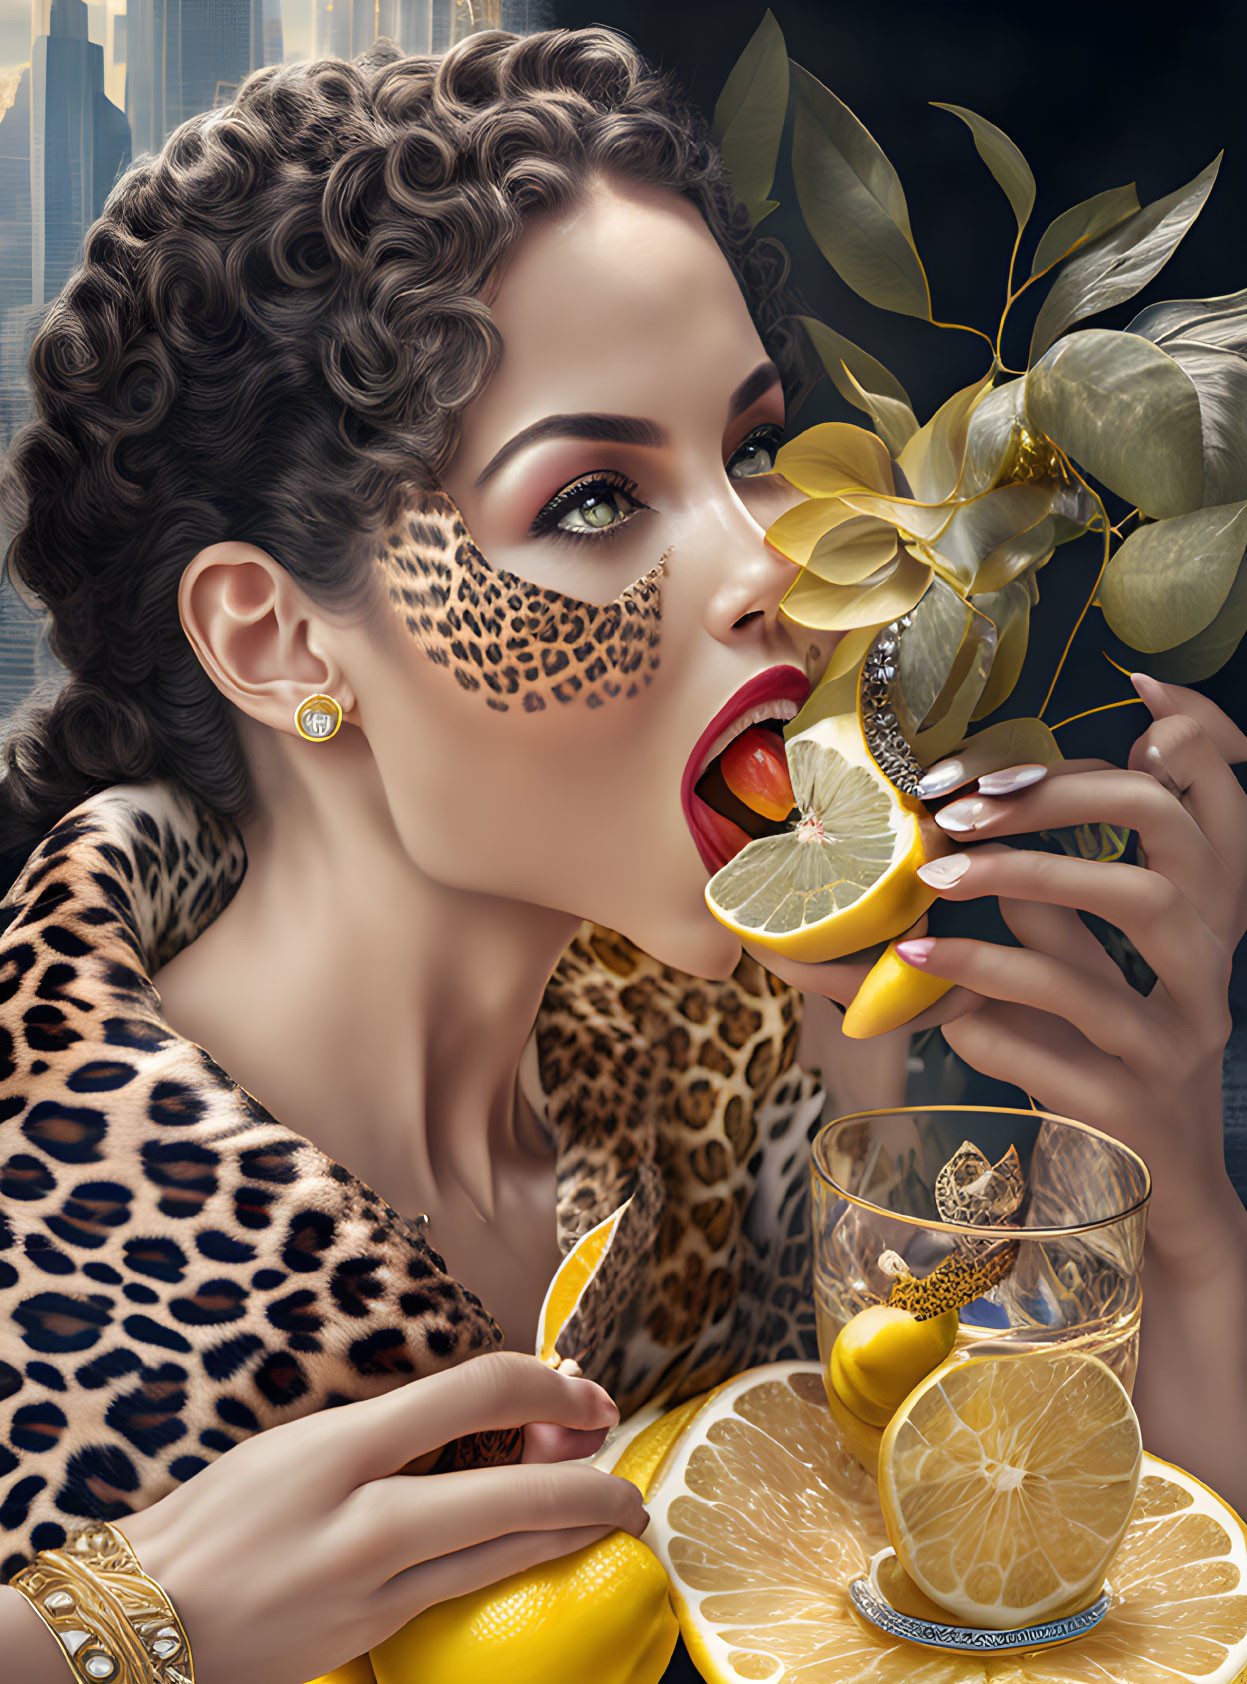 Woman with Leopard Print Accessory Bites Lemon Slice in Luxurious Setting